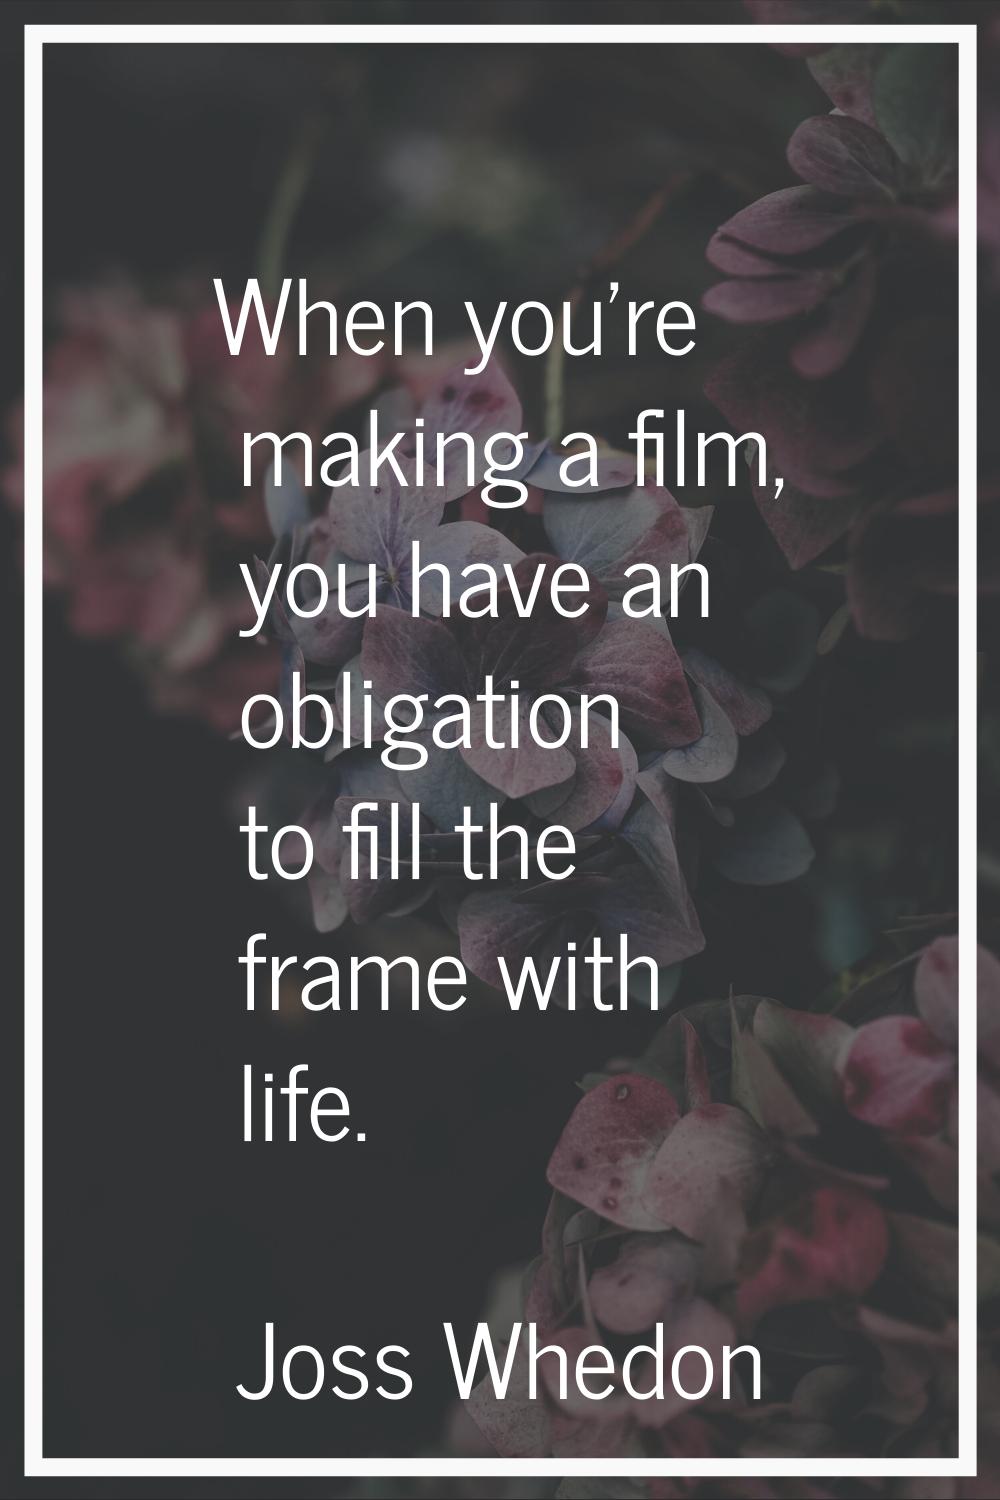 When you're making a film, you have an obligation to fill the frame with life.